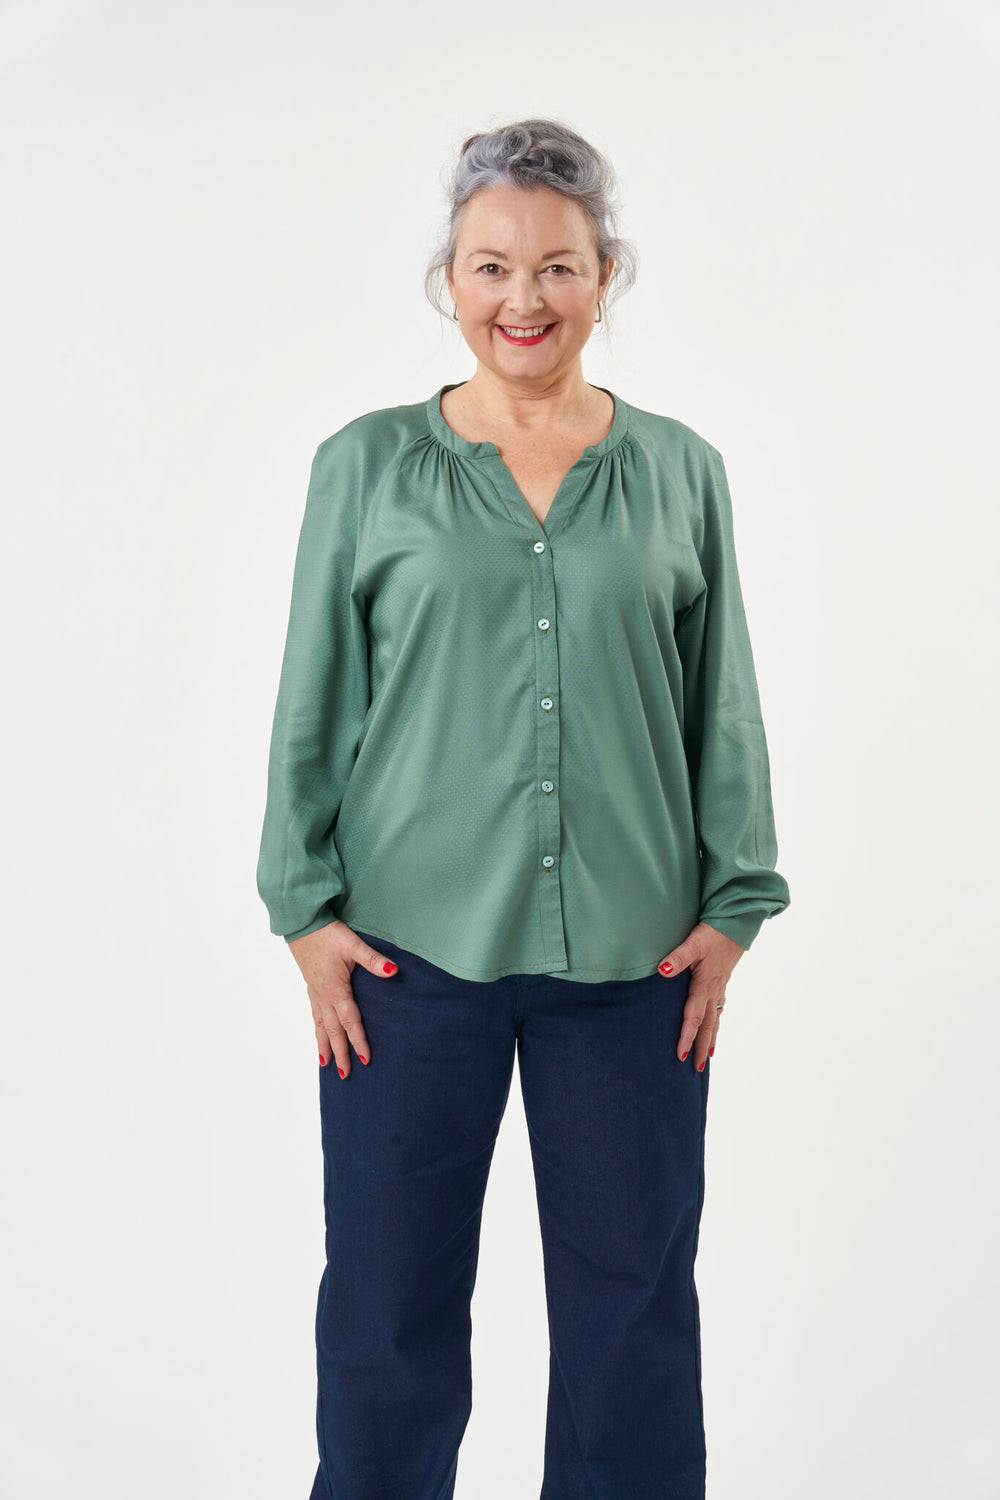 Woman wearing the Zadie Blouse sewing pattern from Sew Over It on The Fold Line. A blouse pattern made in chiffon, georgette, crepe or fine rayon fabrics, featuring a loose fit, button front closure, short band collar and long gathered sleeves with button